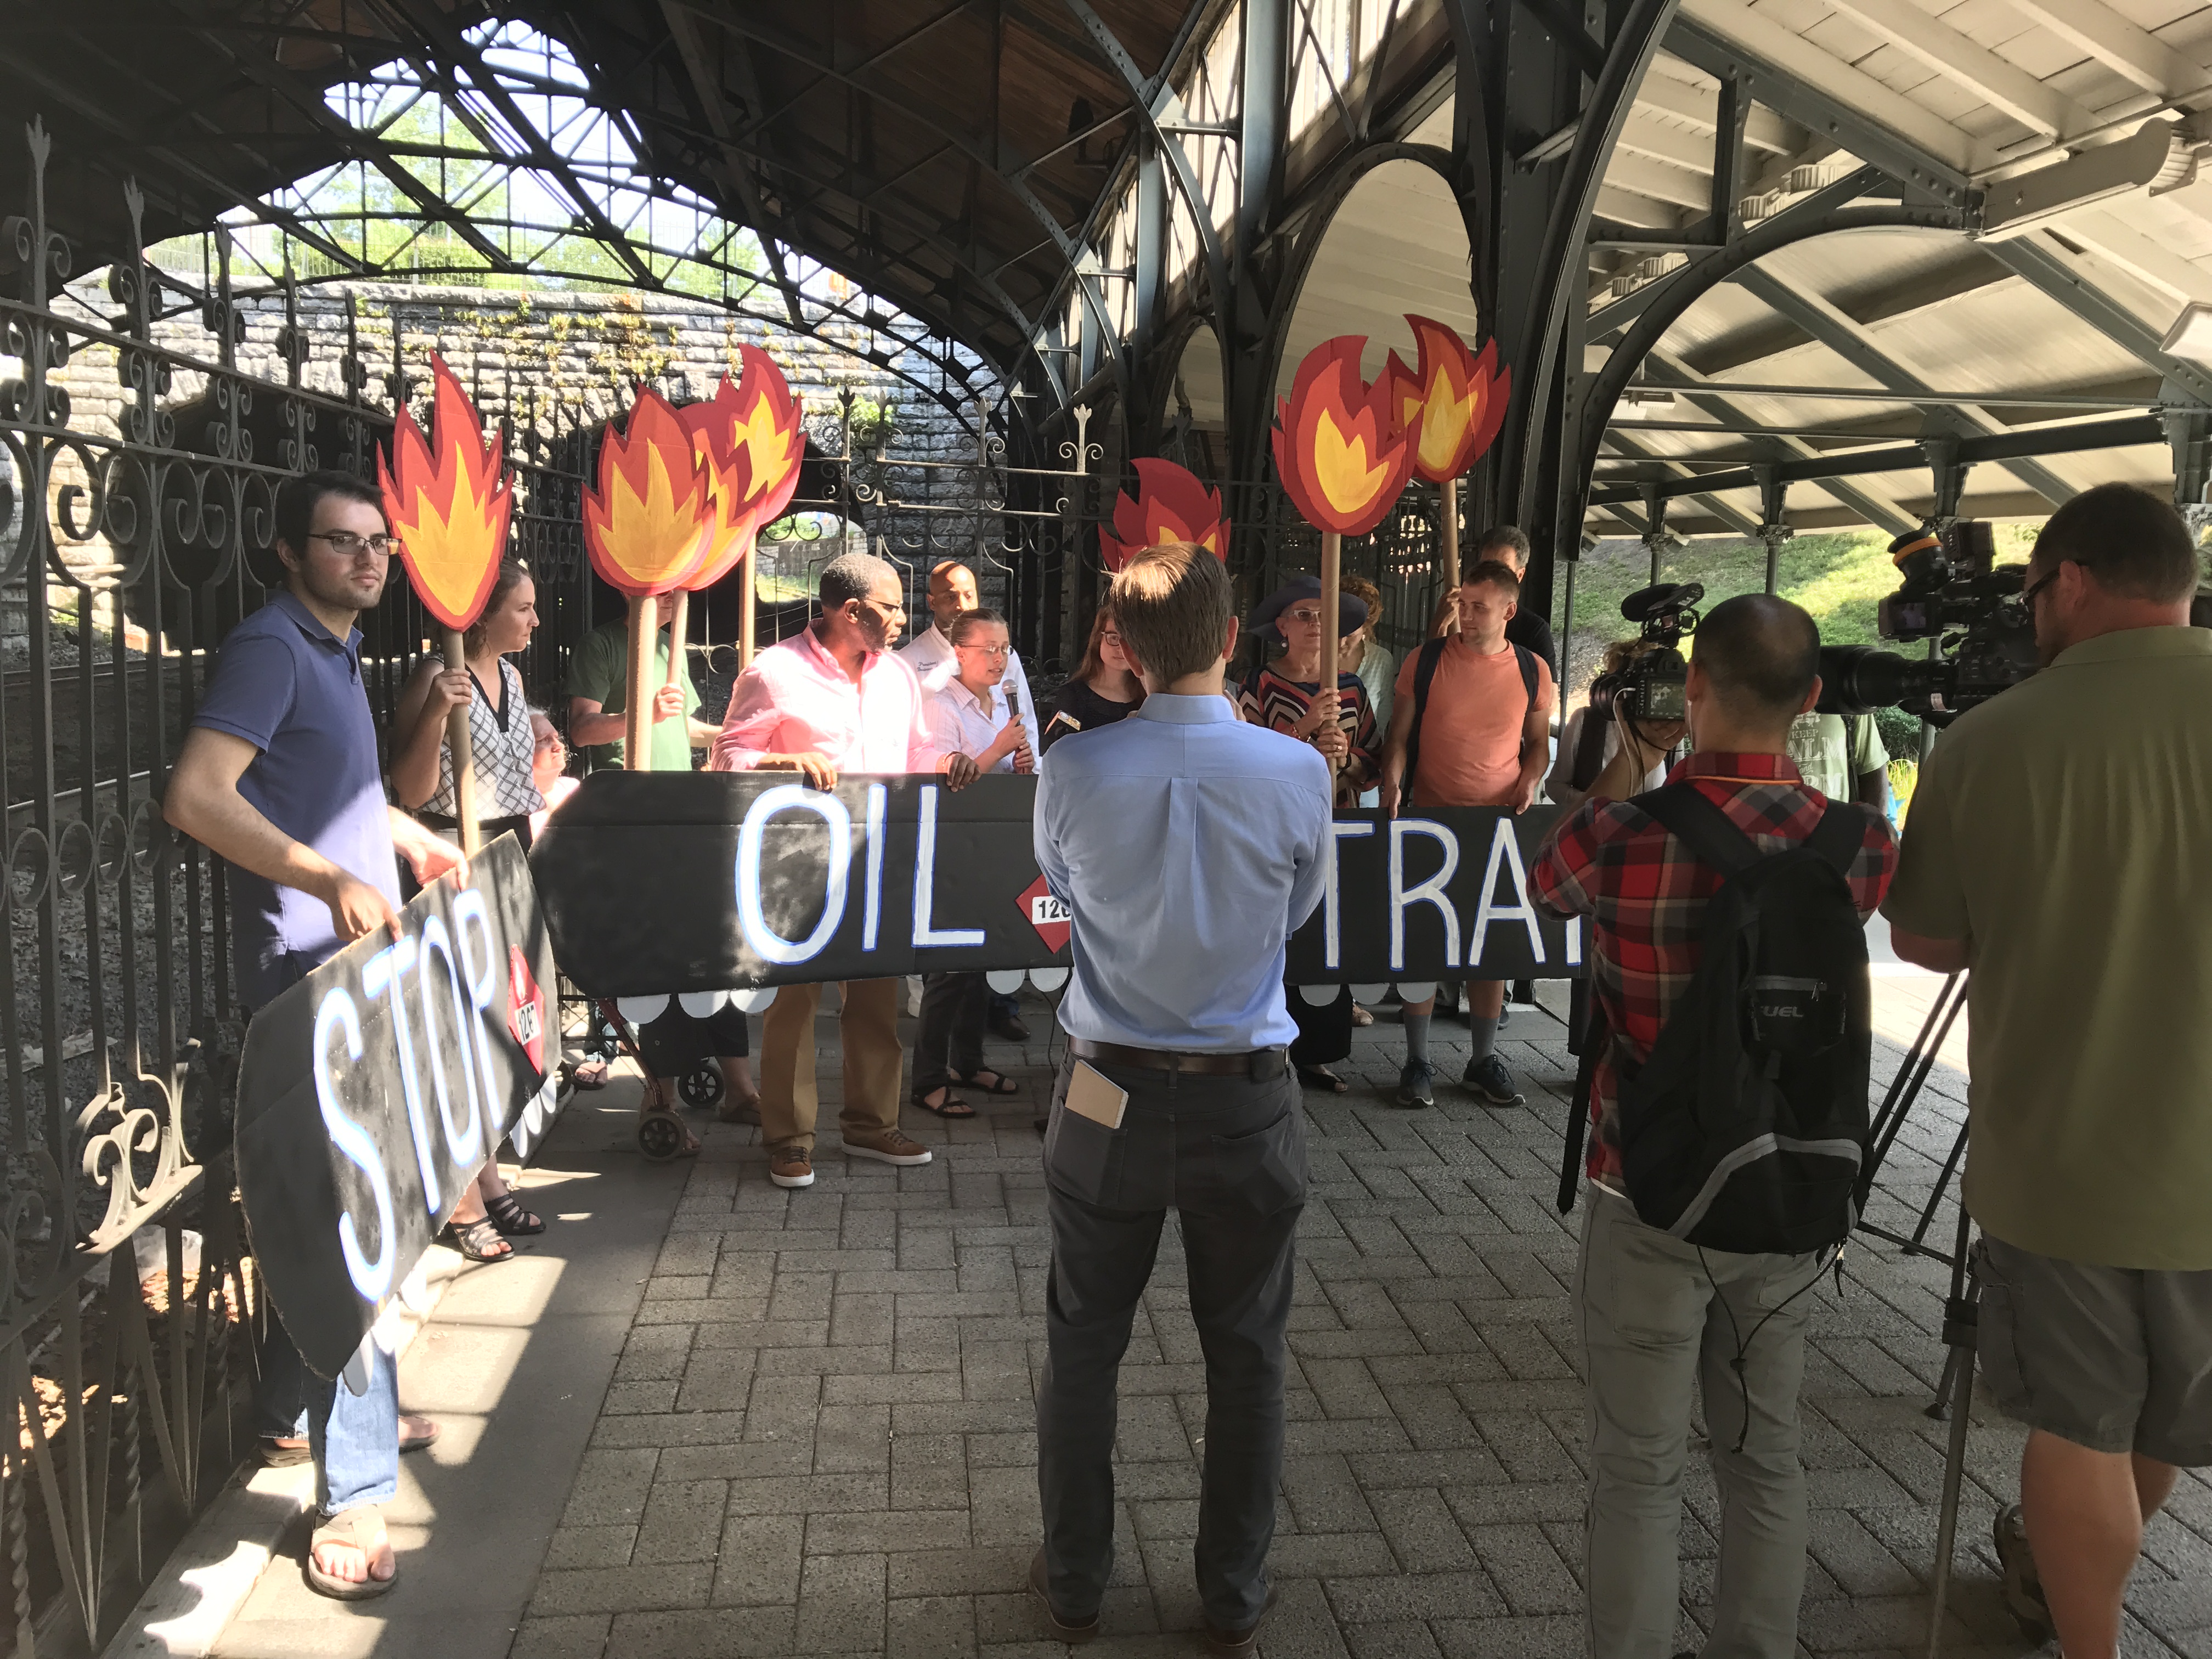 15 people hold signs saying "Stop Oil Trains" and showing train tank cars and flames as news media films